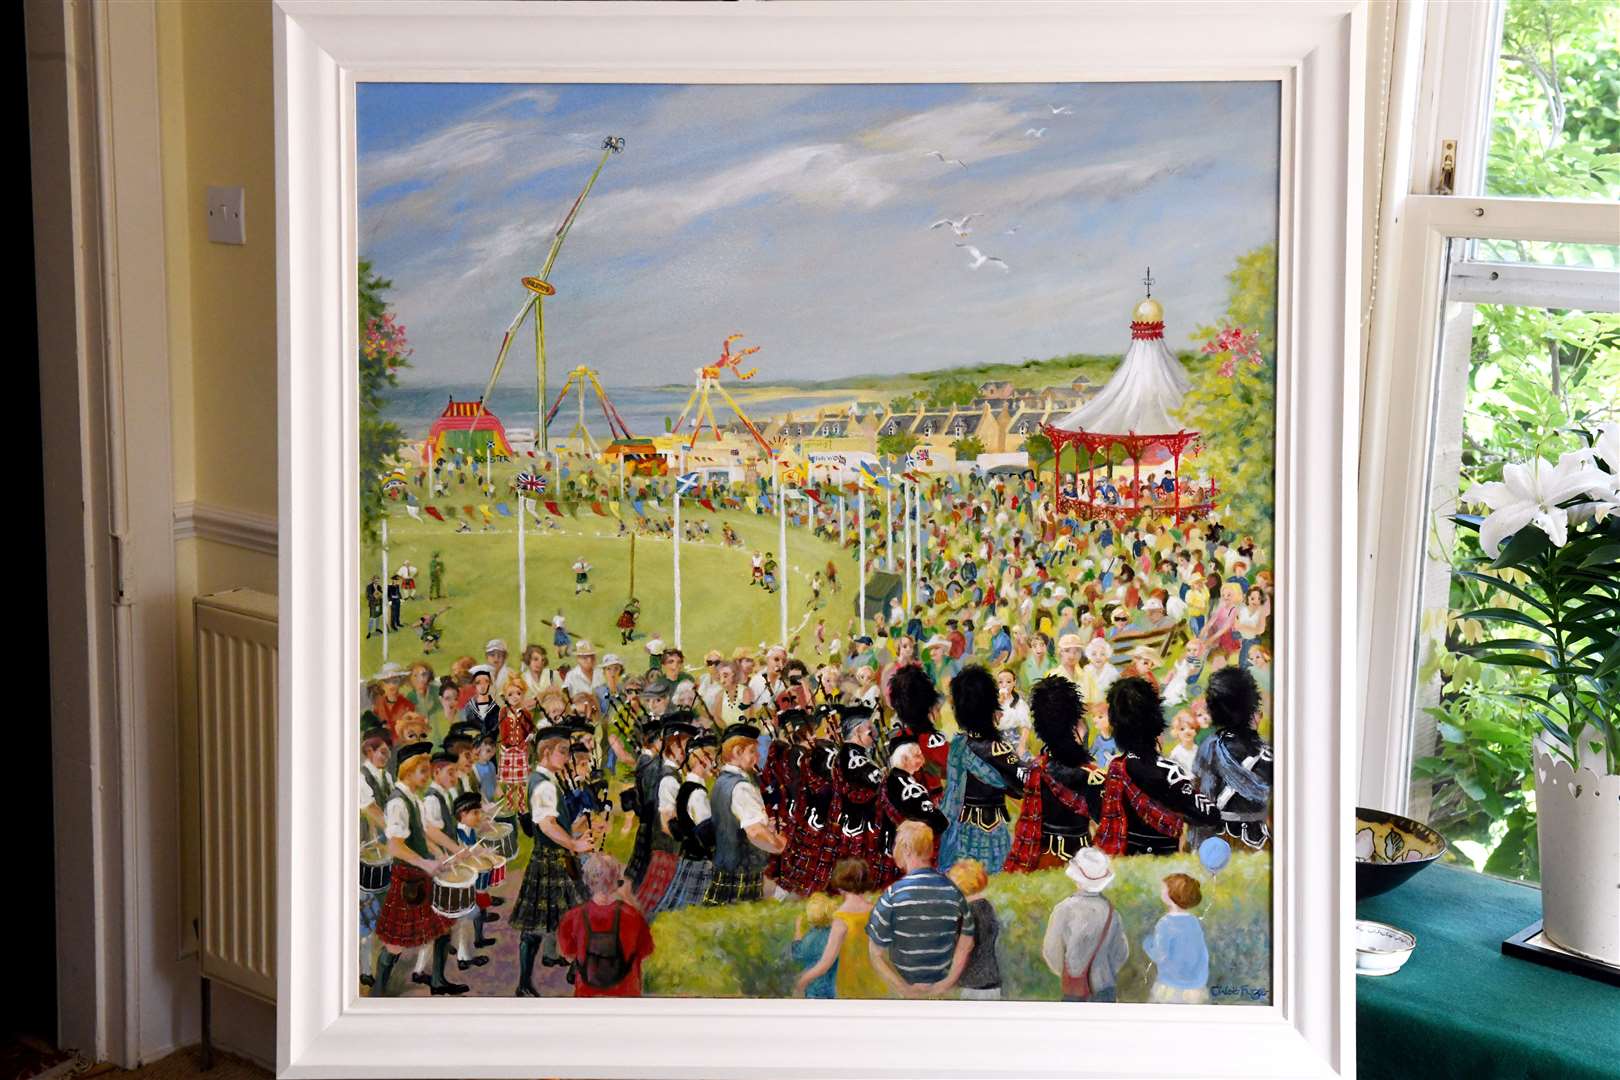 The magic of Nairn Highland Games has been captured in oils by artist Chloe Furze.